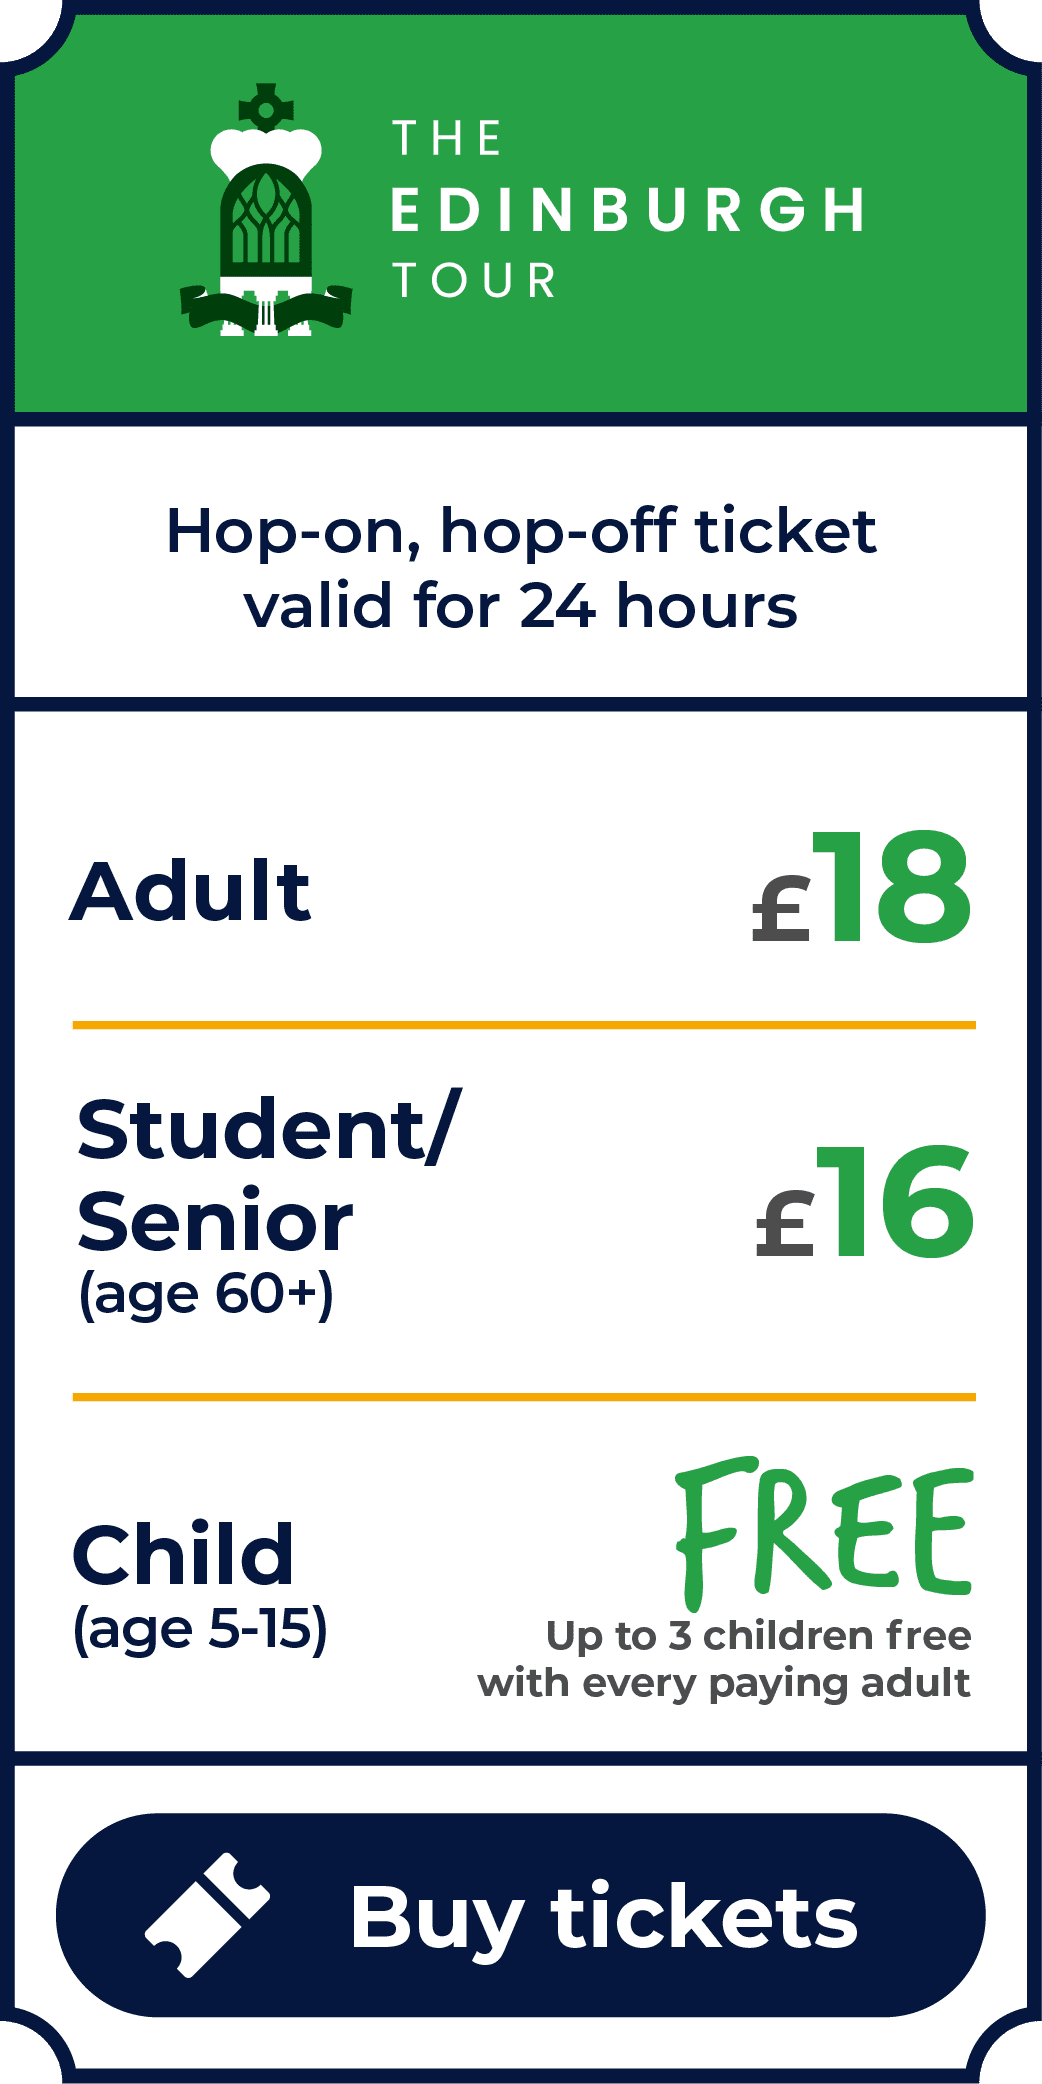 The Edinburgh Tour. Hop on, hop off ticket valid for 24 hours. Prices: Adult (age 16+) is £18. Student (with valid student ID) is £16. Senior (age 60+) is £16. Child (age 5-15) is free. Up to 3 children go free with every paying adult. Click to buy tickets.